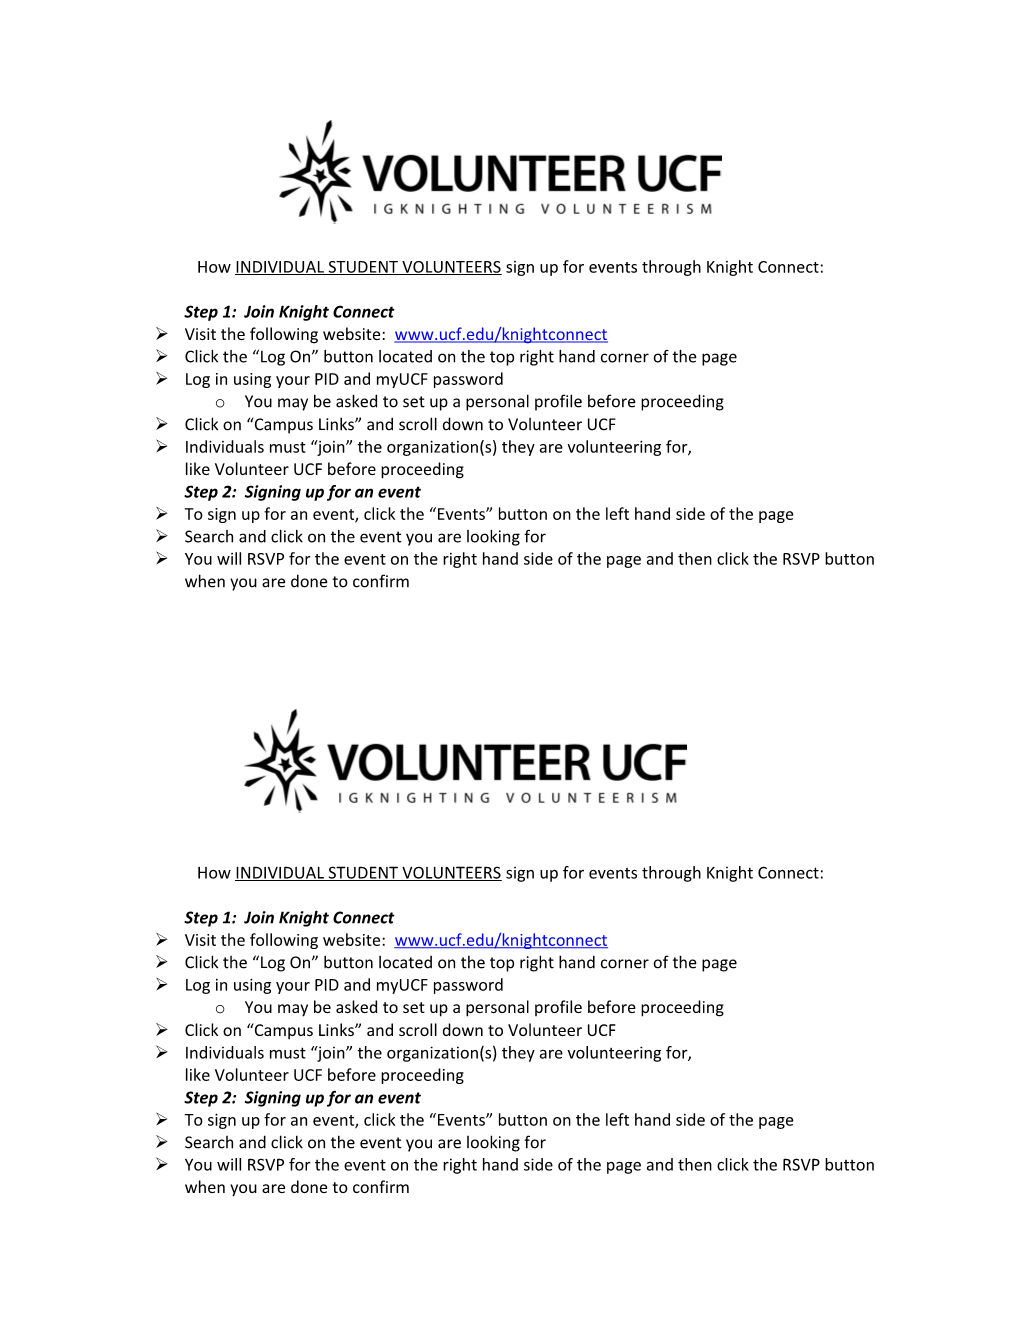 How INDIVIDUAL STUDENT VOLUNTEERS Sign up for Events Through Knight Connect